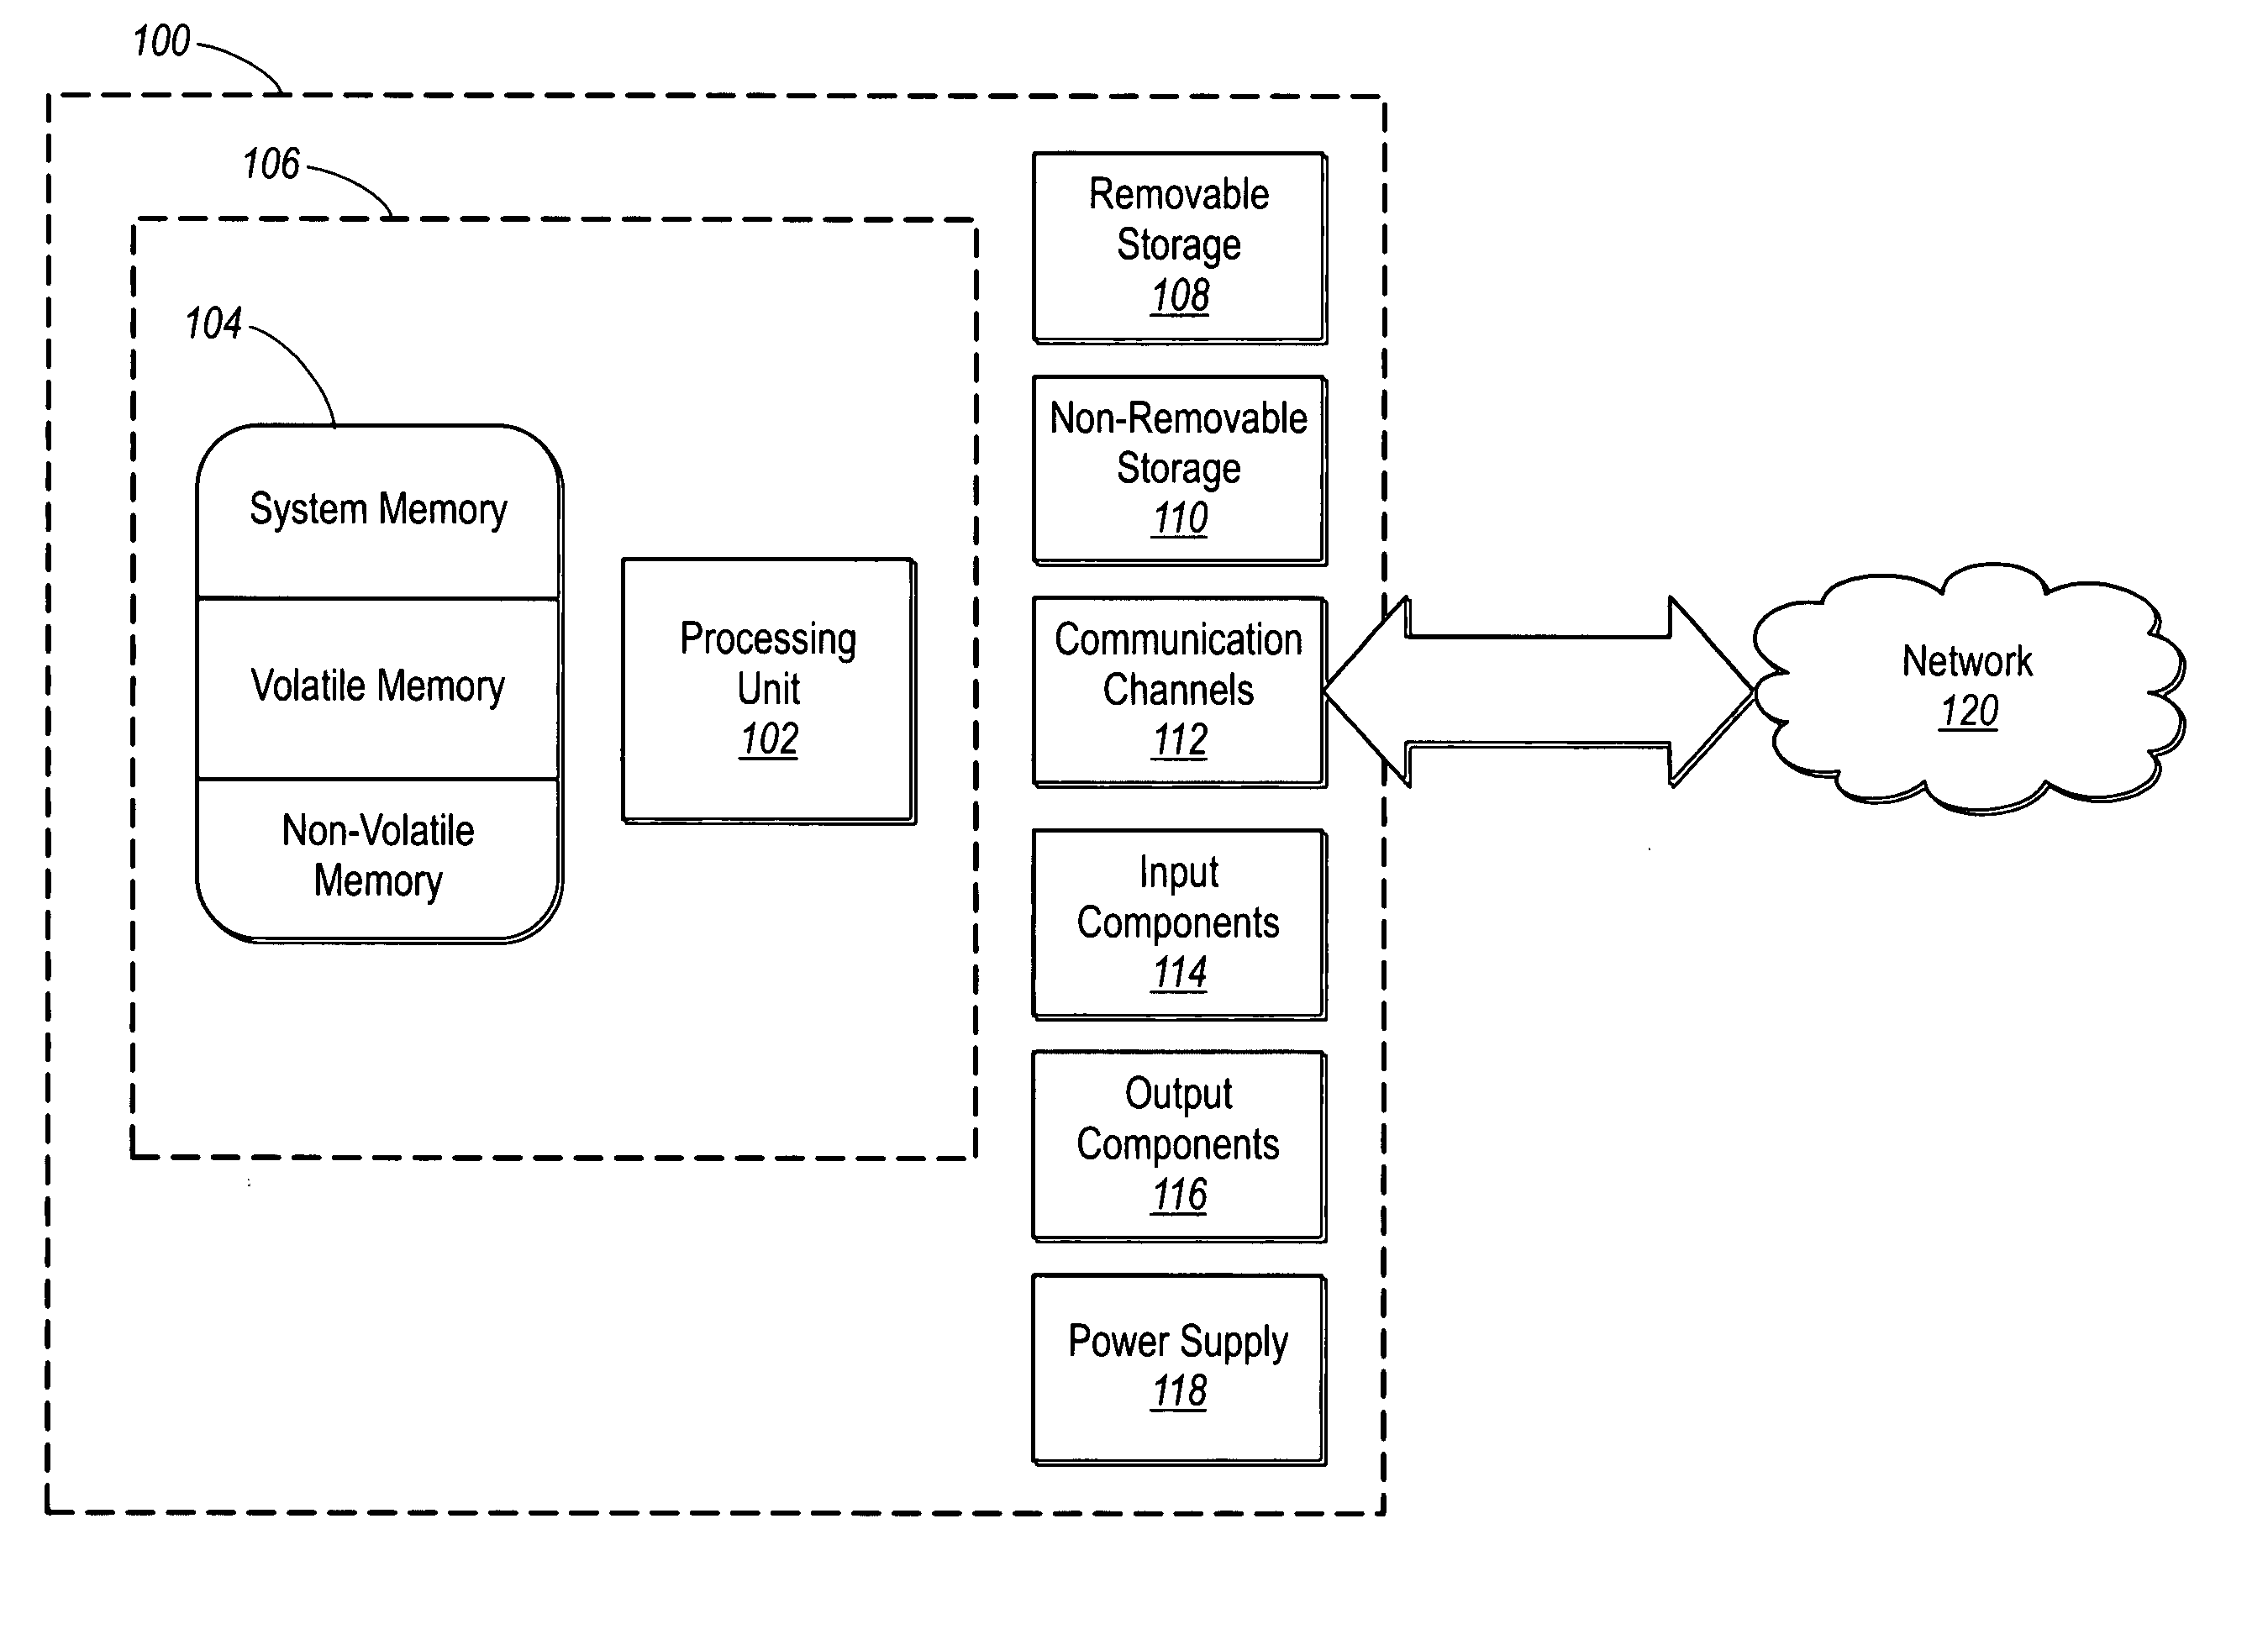 Integrated messaging user interface with message-based logging